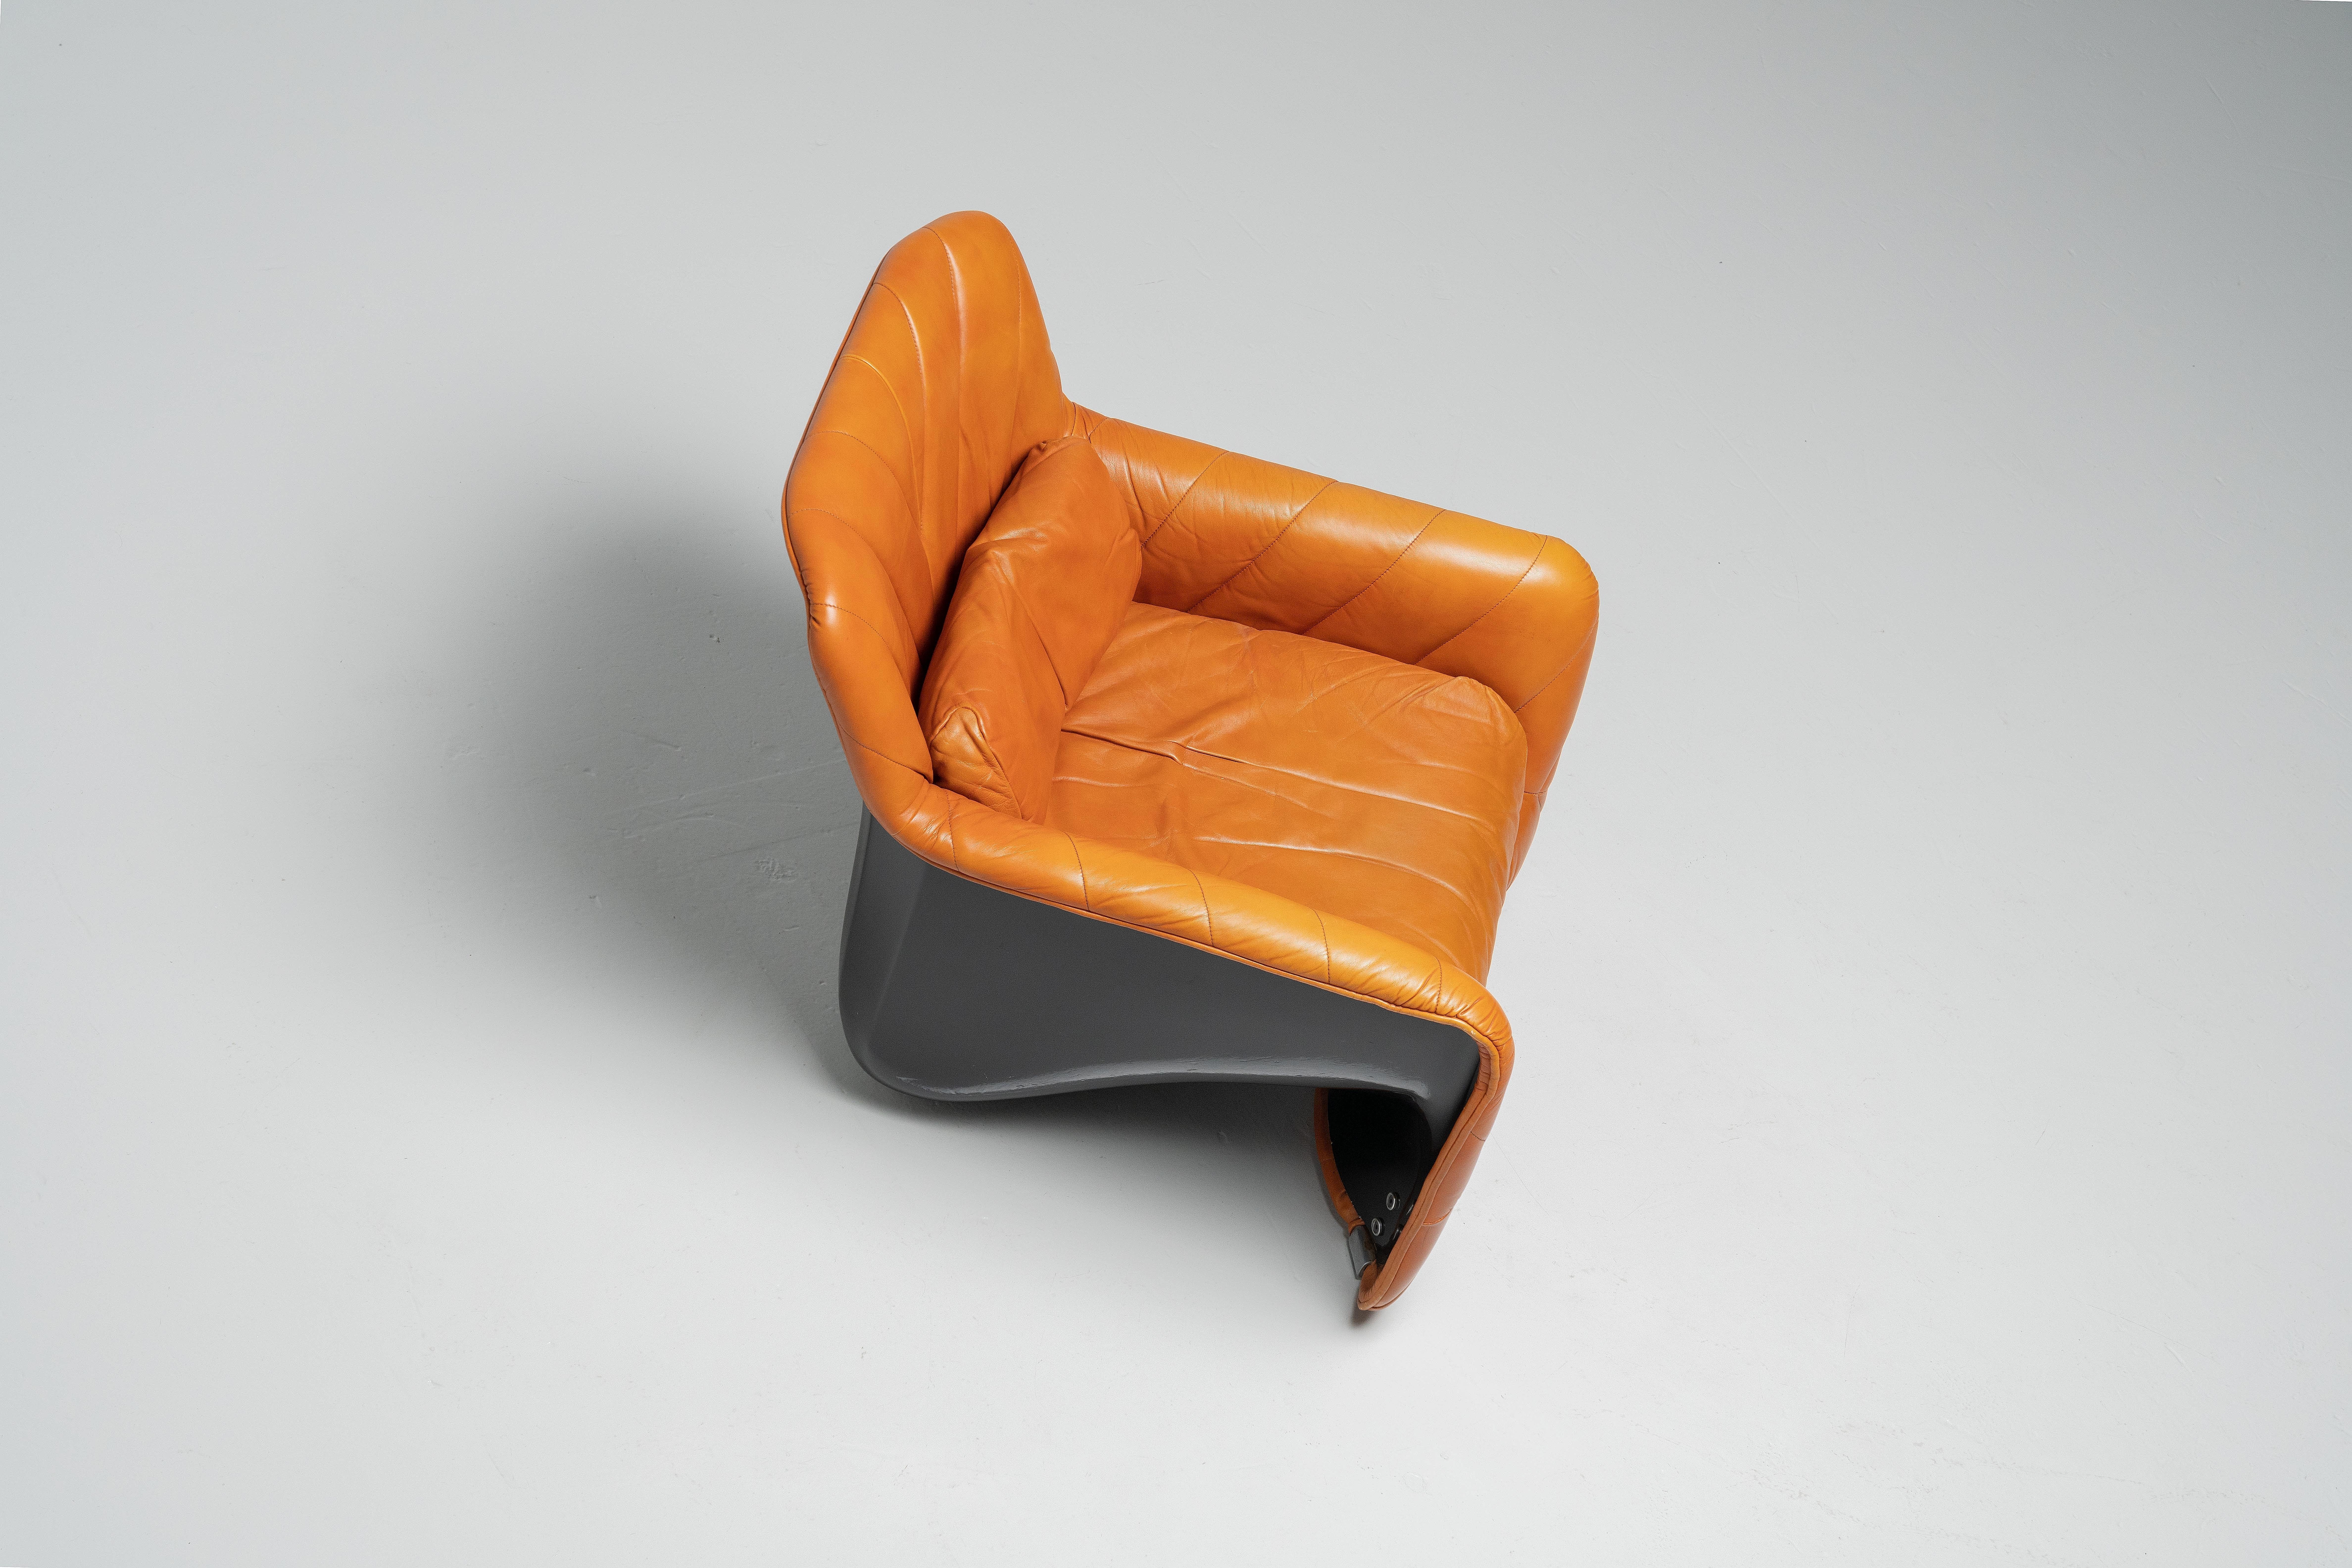 Carlo Bartoli Bicia Lounge Chair Arflex, Italy, 1969 In Good Condition For Sale In Roosendaal, Noord Brabant